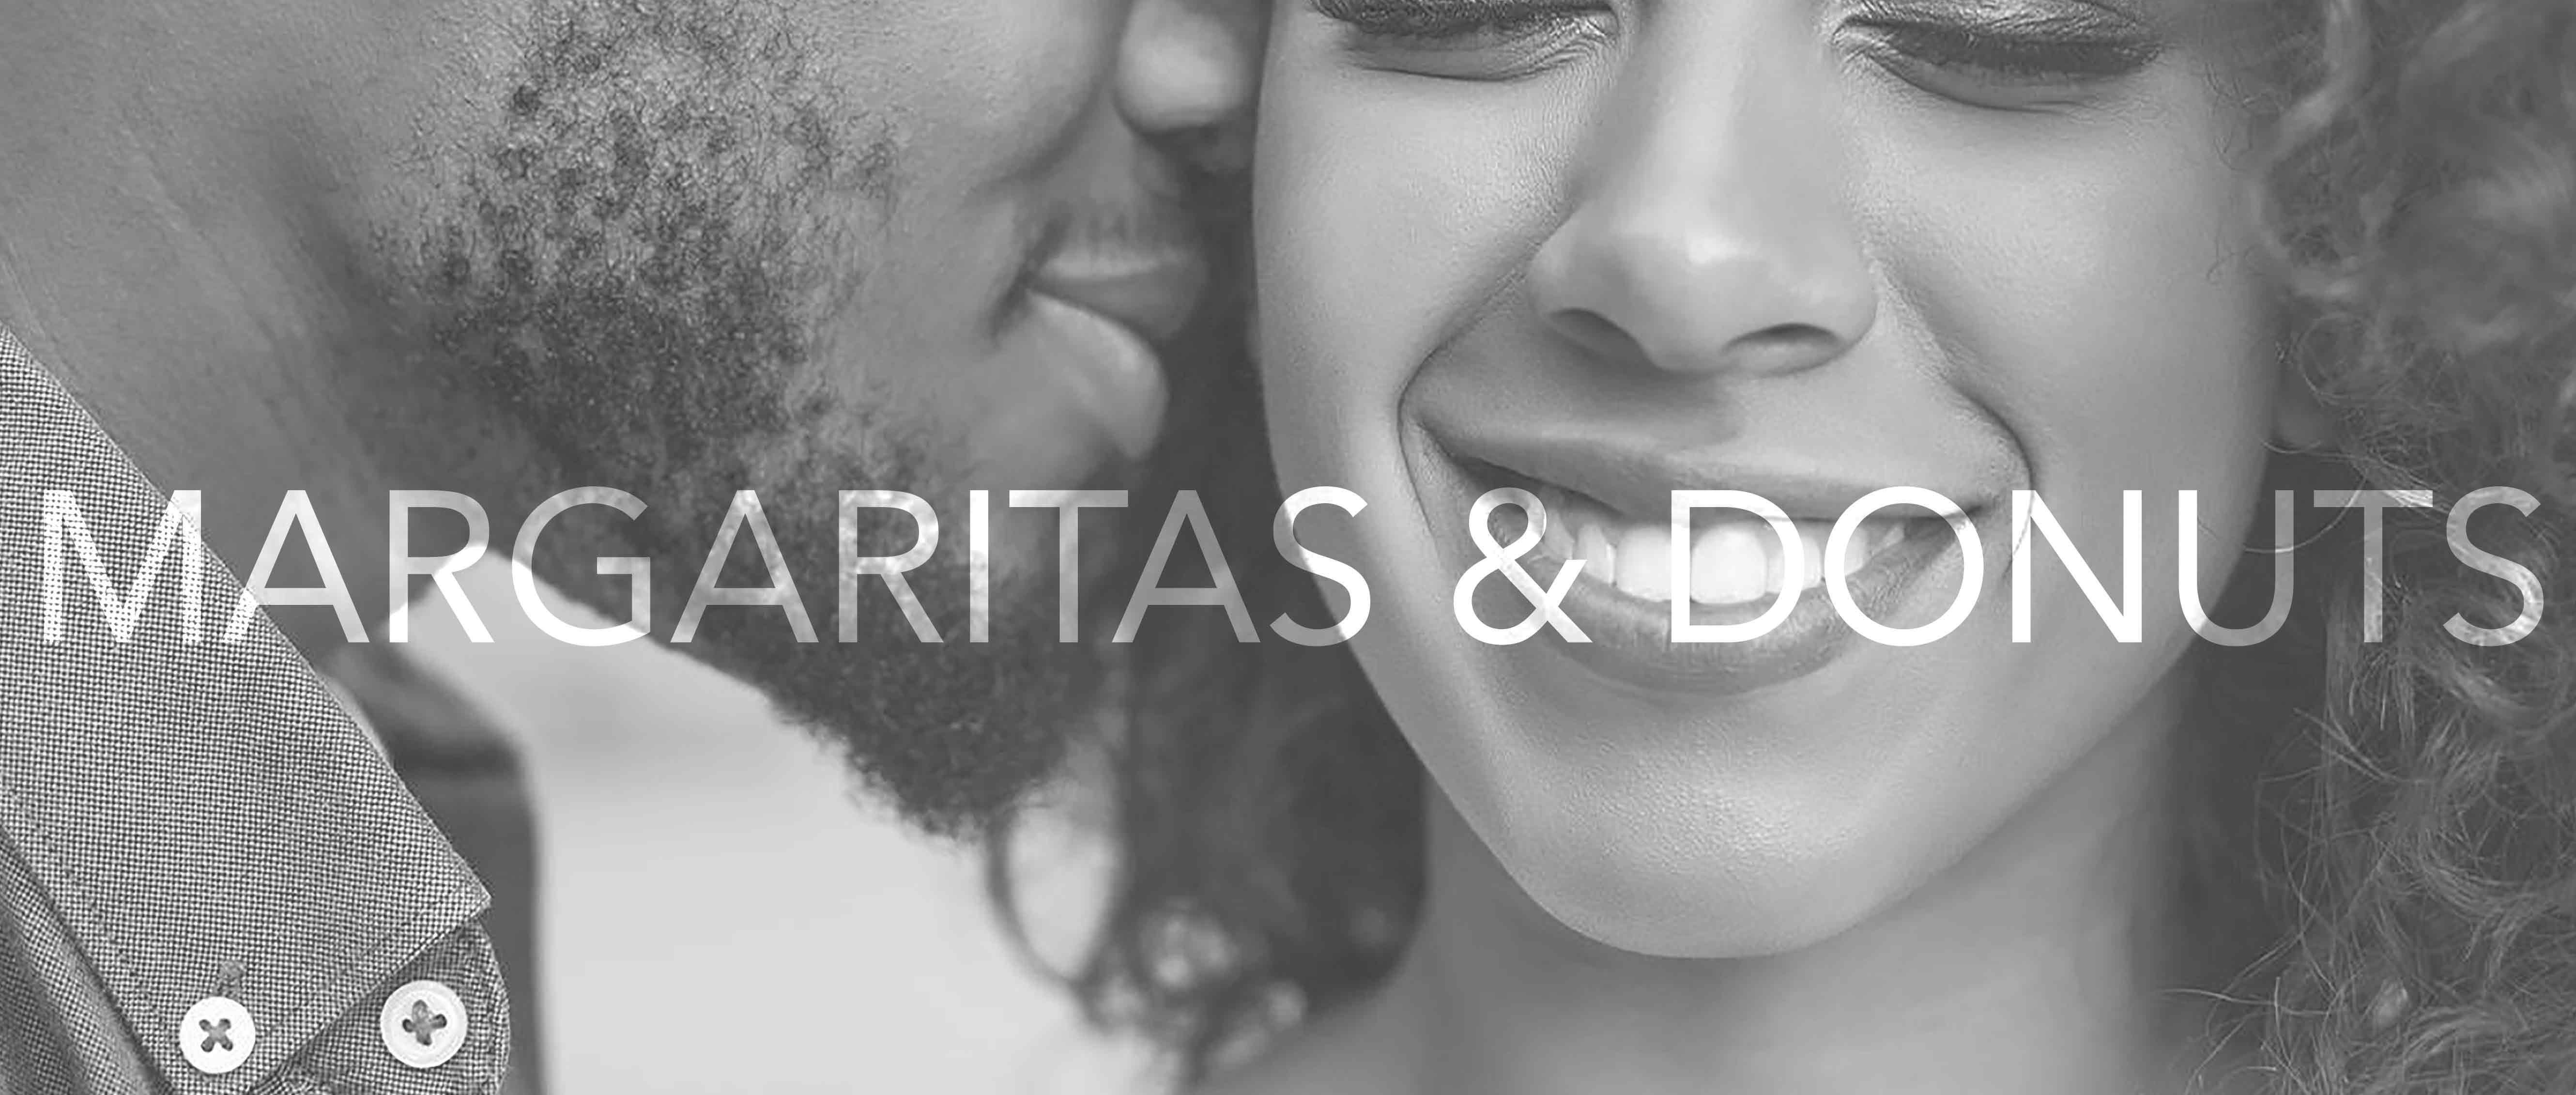 Margaritas and Donuts: a black and white photo extreme close up of a man and woman cheek-to-cheek